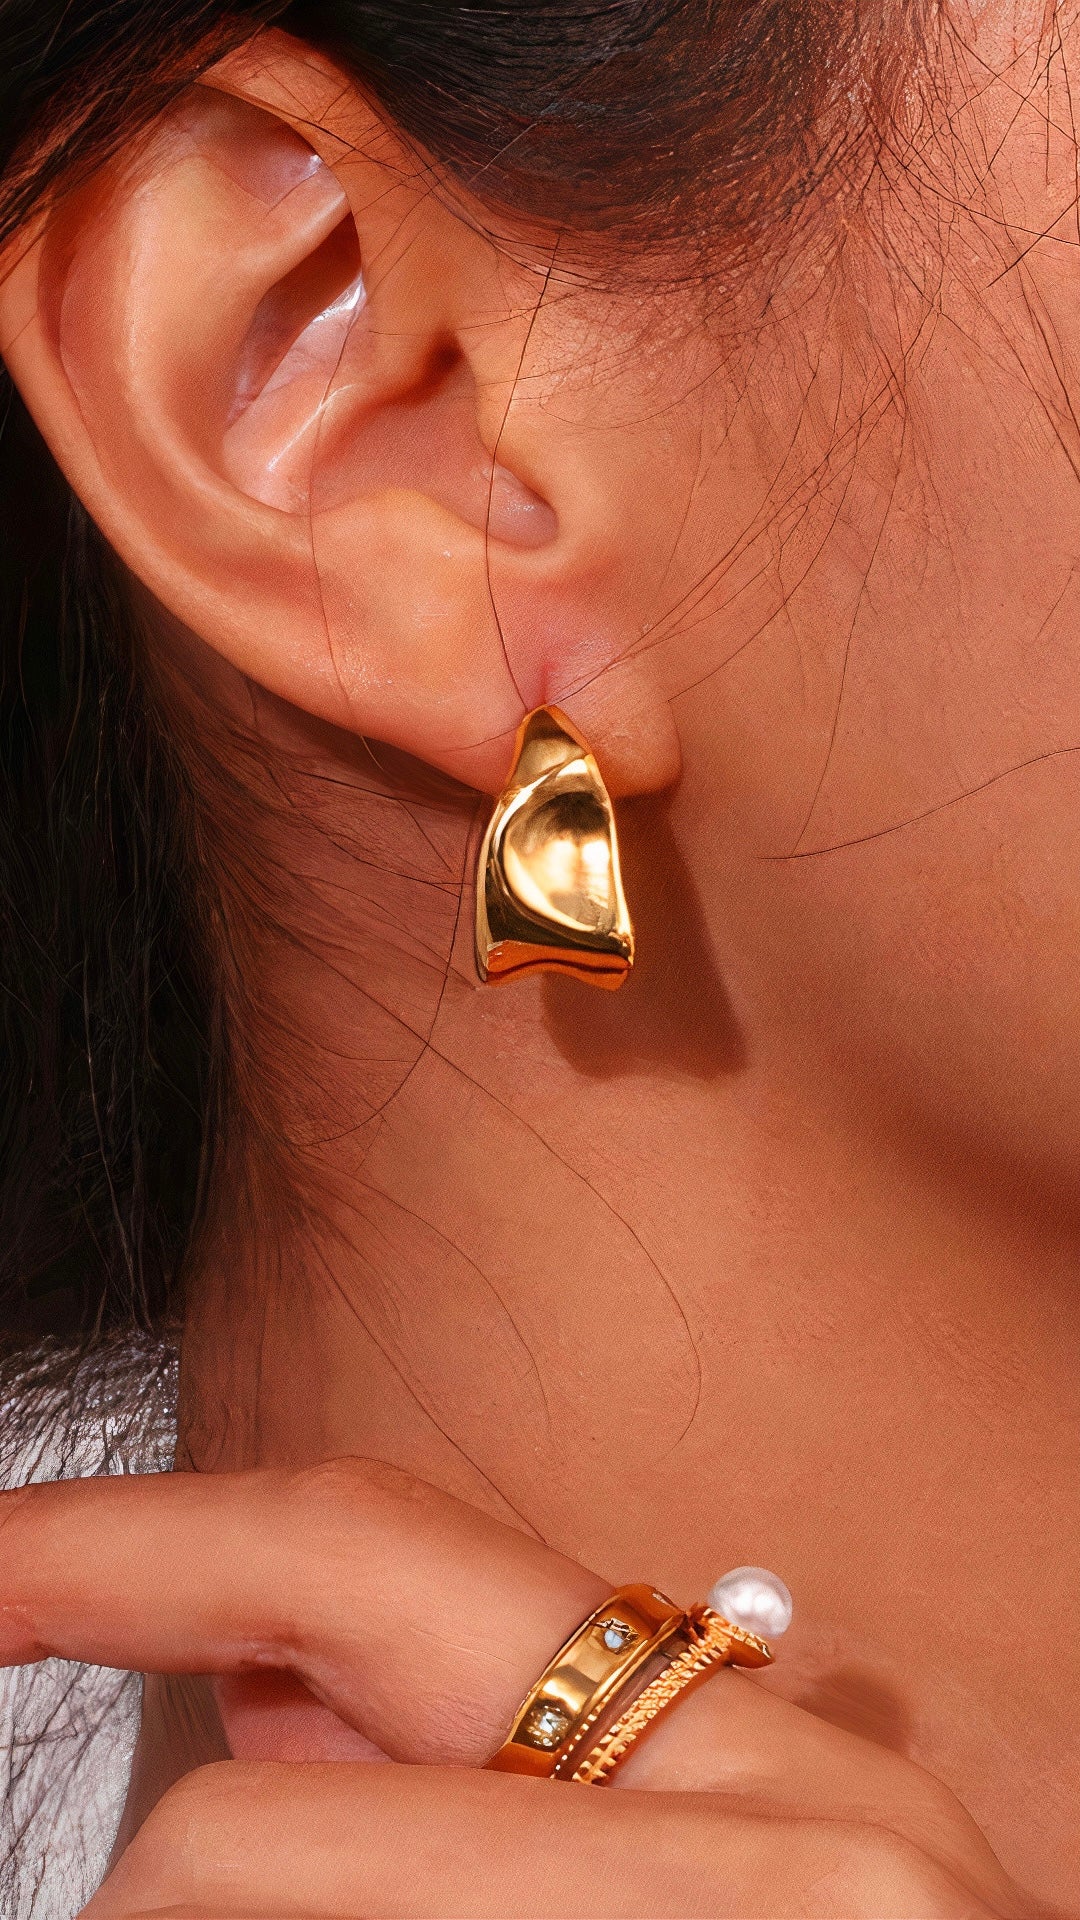 Elevate your look with stunning earrings